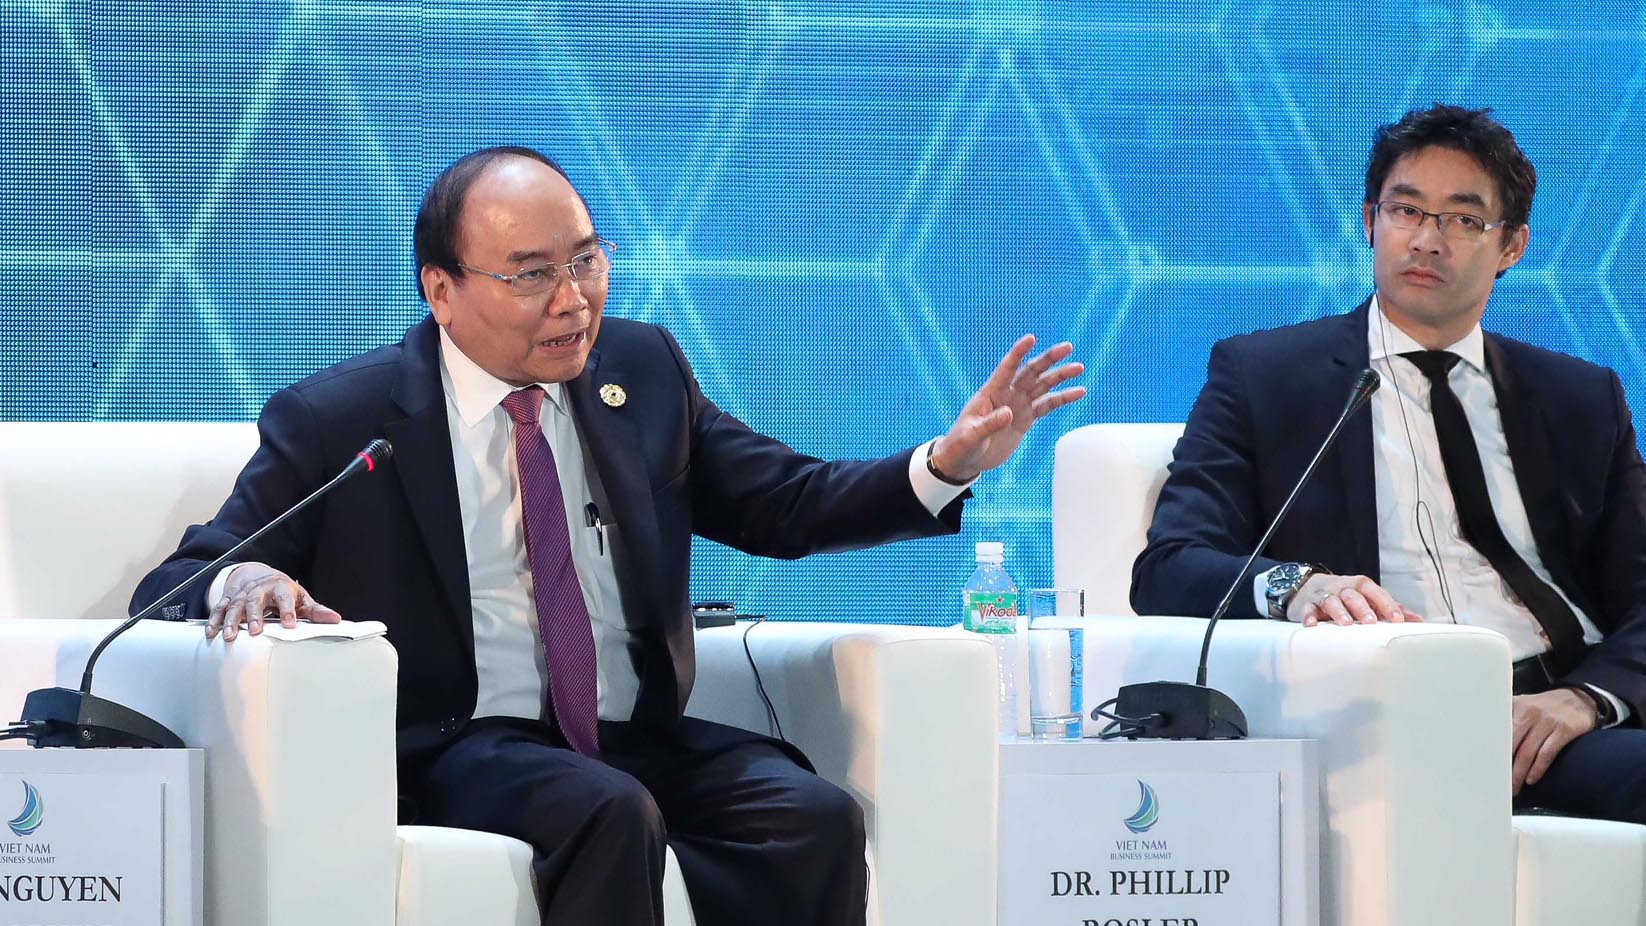 Vietnamese Prime Minister Nguyen Xuan Phuc (L) speaks at a business summit during the APEC Economic Leaders’ Week in Da Nang, November 7, 2017. Photo: Tuoi Tre